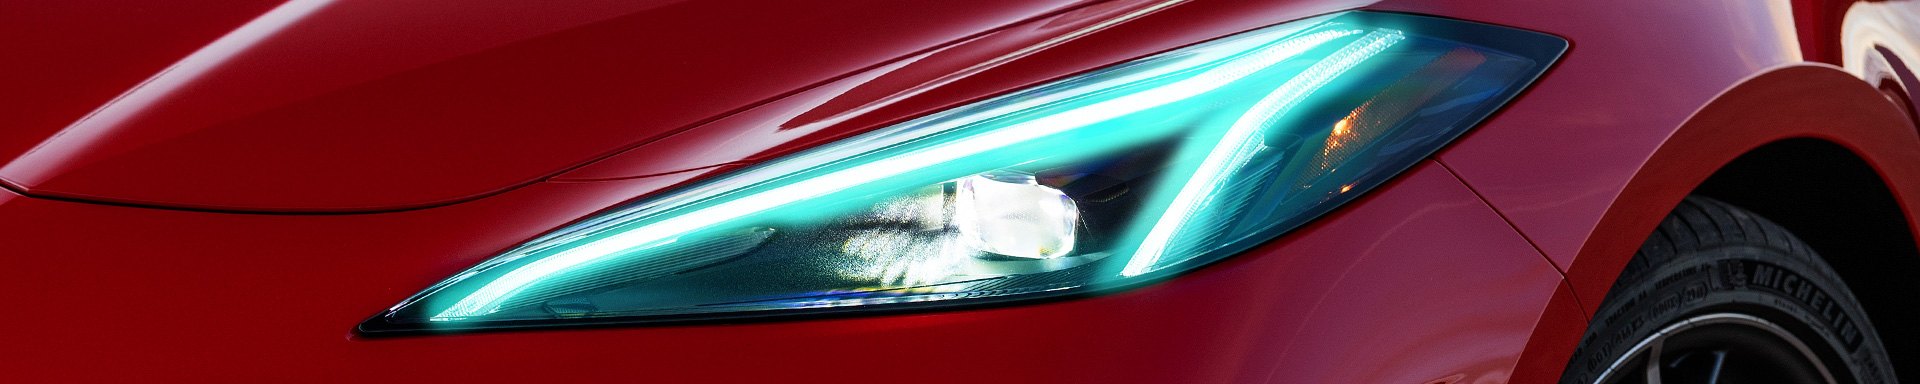 Sneak Peek At All-New Colorful Headlight Upgrade by ORACLE For C8 Corvette 